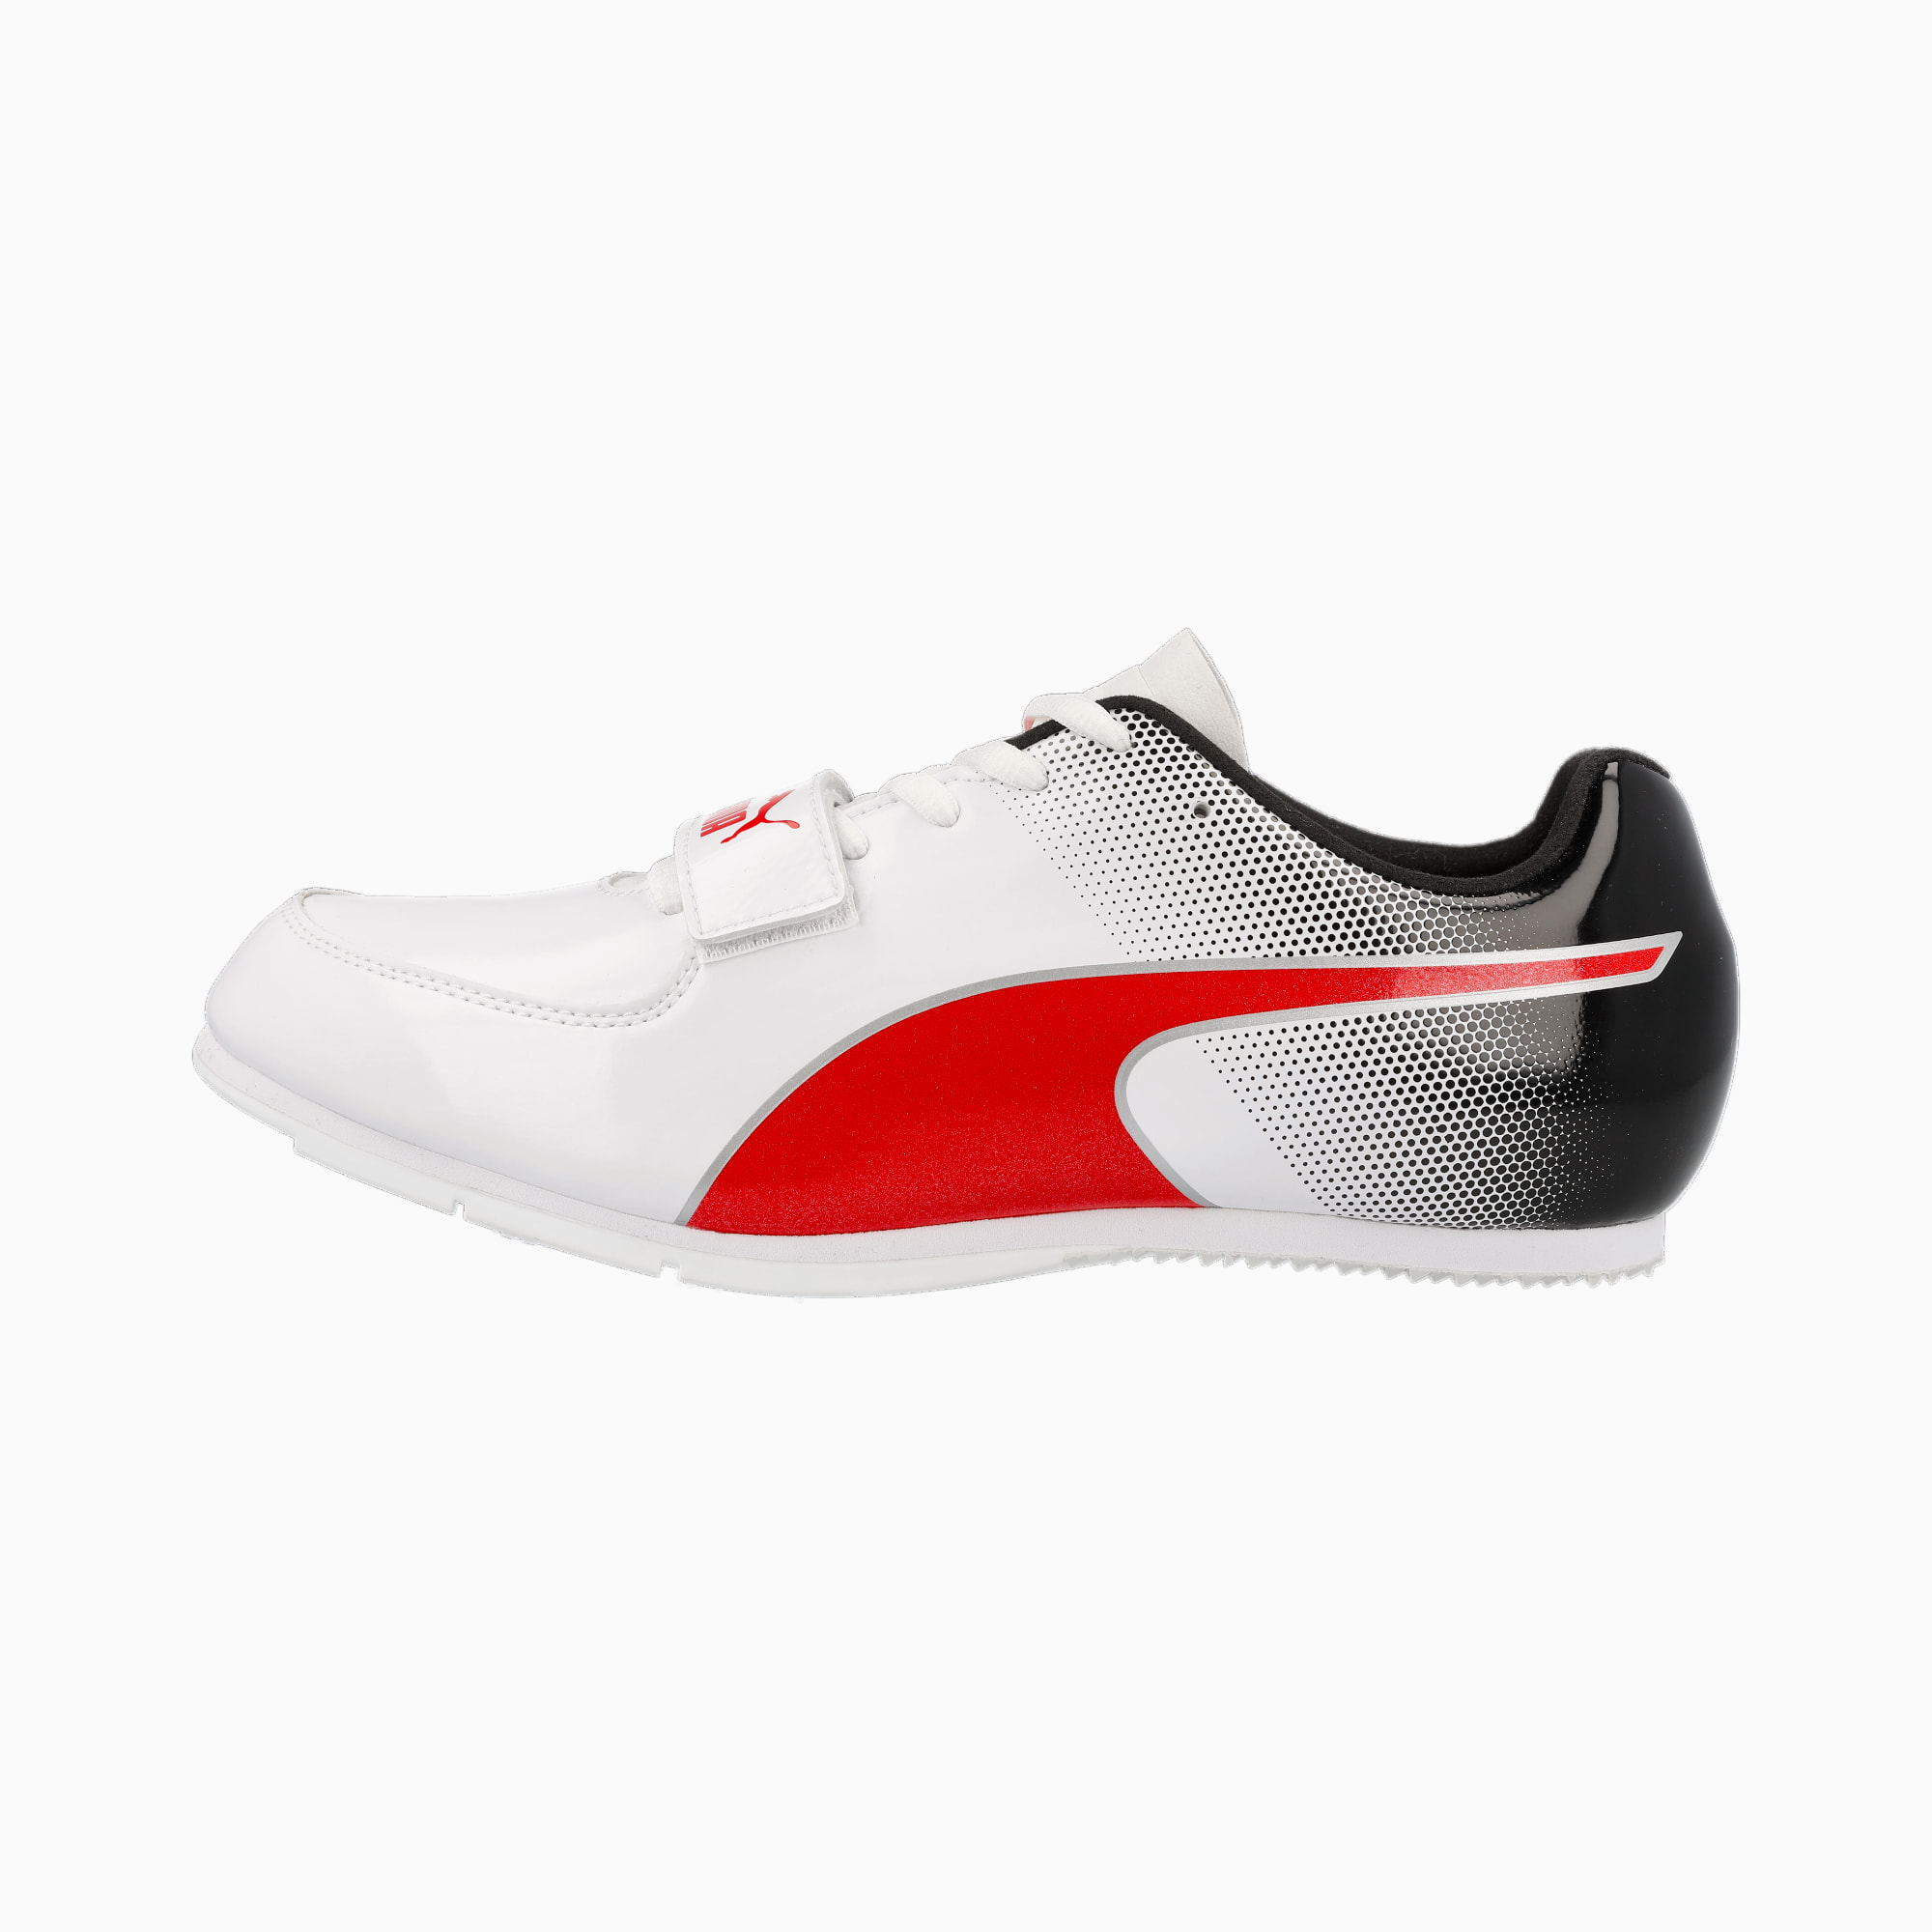 Women's PUMA Evospeed Long Jump 10 Track And Field Shoes, White/Black/Red, Size 35,5, Shoes